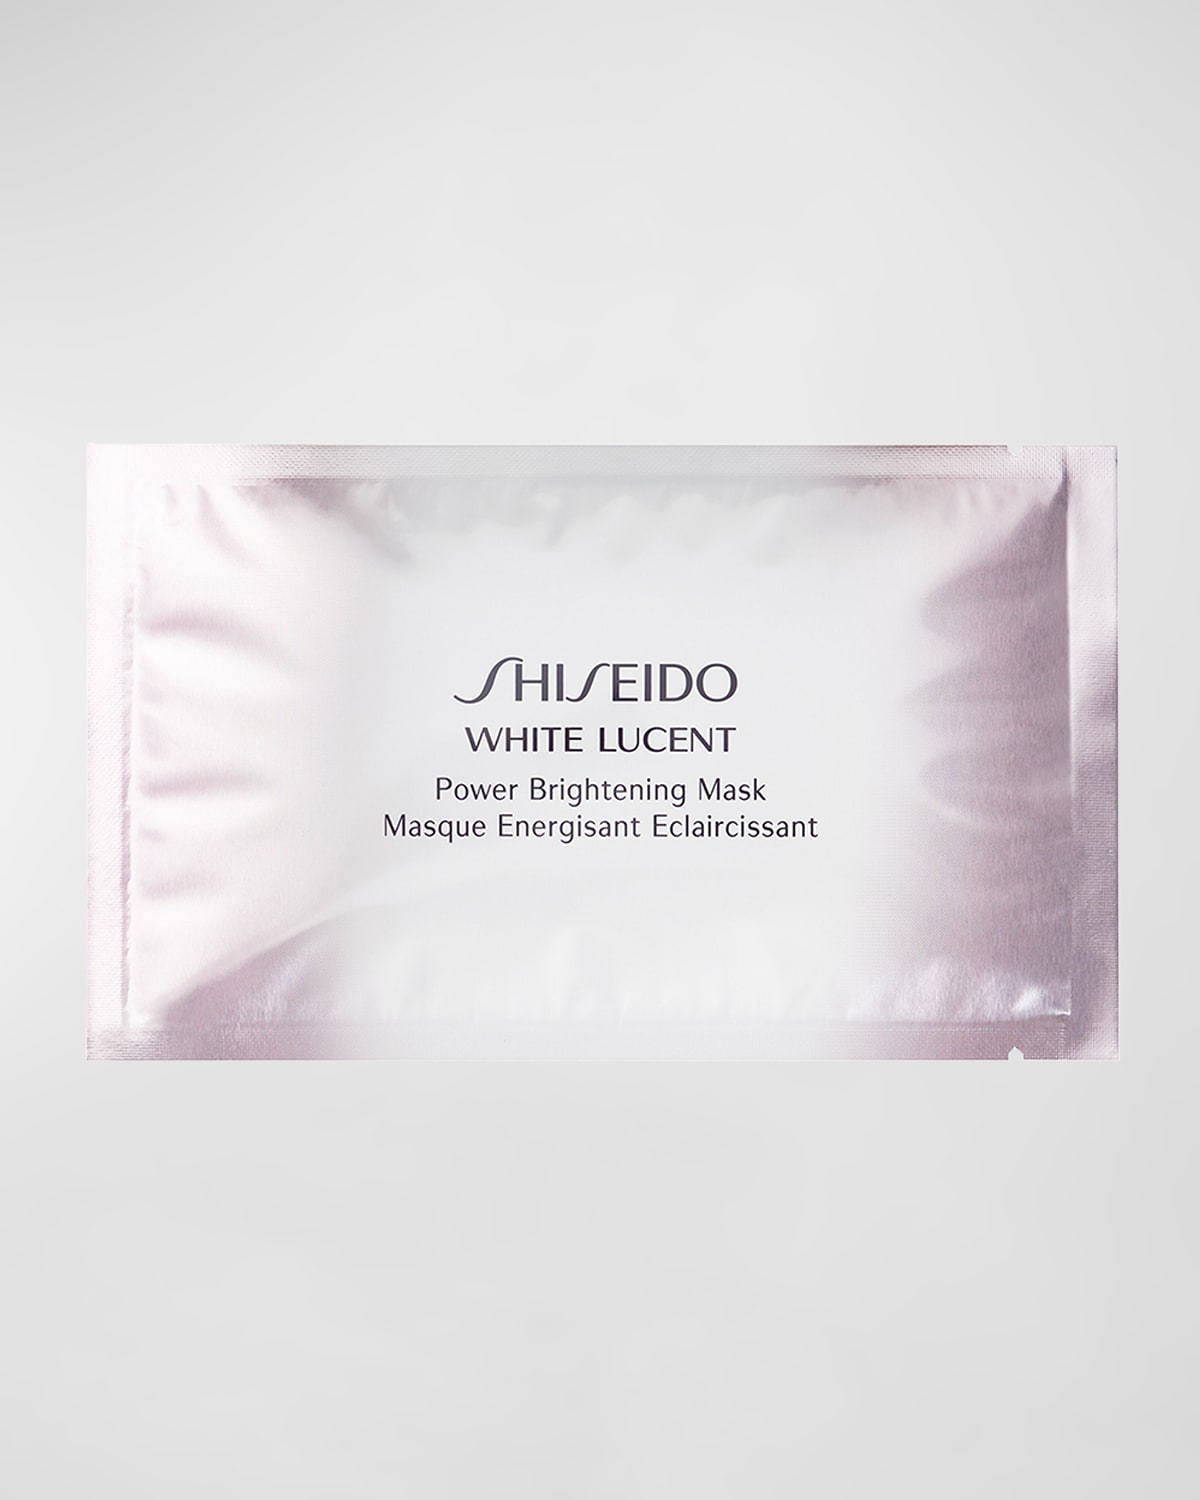 White Lucent Power Brightening Mask, Yours with any $75 Shiseido Purchase